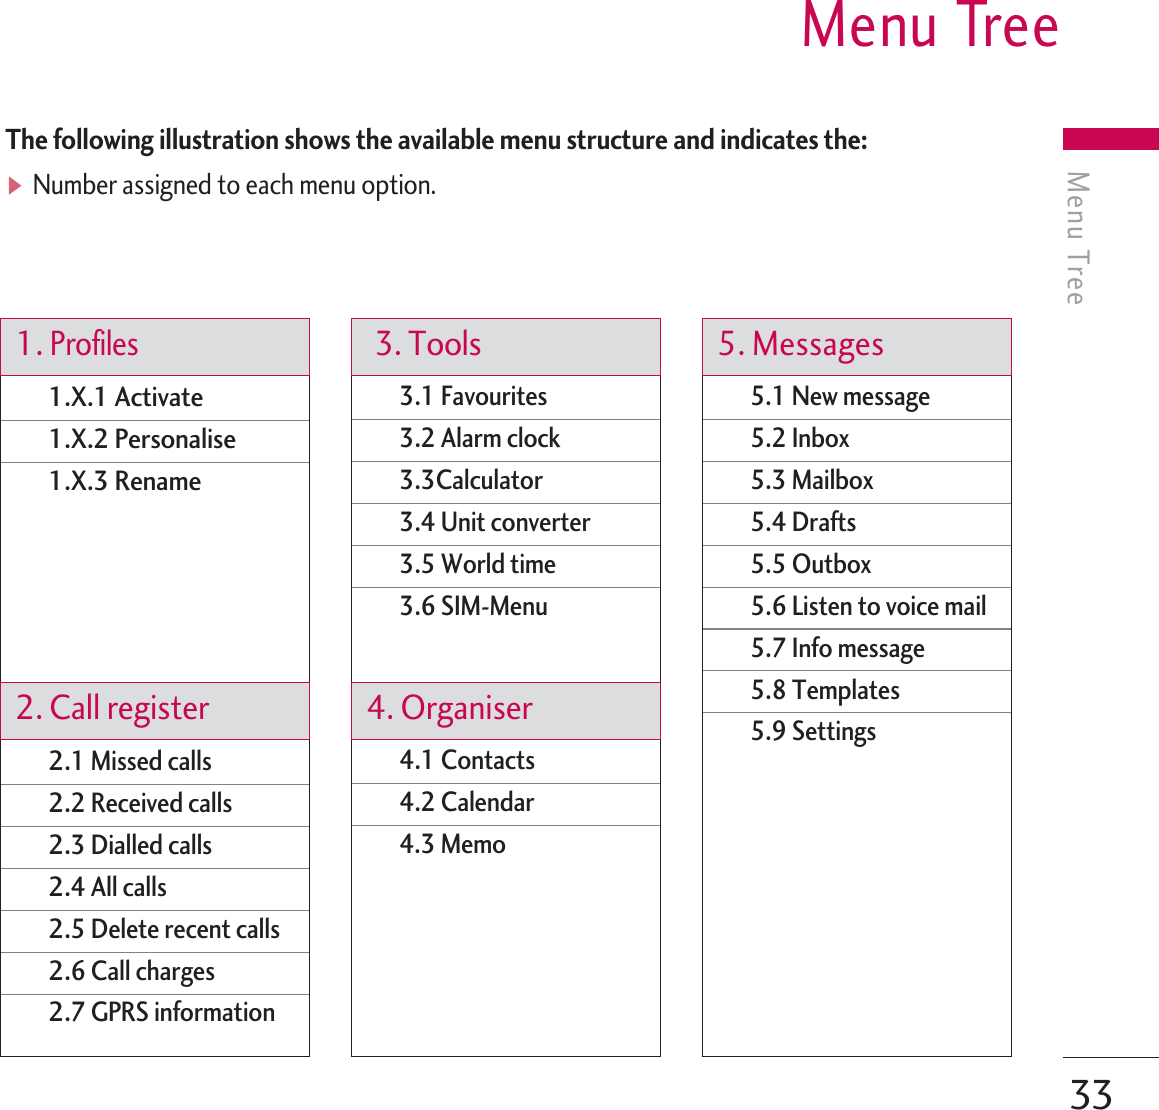 The following illustration shows the available menu structure and indicates the:]Number assigned to each menu option.  33Menu TreeMenu Tree 5.1 New message5.2 Inbox5.3 Mailbox5.4 Drafts5.5 Outbox5.6 Listen to voice mail5.7 Info message5.8 Templates5.9 Settings3.1 Favourites3.2 Alarm clock3.3Calculator3.4 Unit converter3.5 World time3.6 SIM-Menu4.1 Contacts4.2 Calendar4.3 Memo1.X.1 Activate 1.X.2 Personalise 1.X.3 Rename 2.1 Missed calls2.2 Received calls2.3 Dialled calls2.4 All calls2.5 Delete recent calls2.6 Call charges2.7 GPRS information1. Profiles3. Tools 5. Messages4. Organiser2. Call register